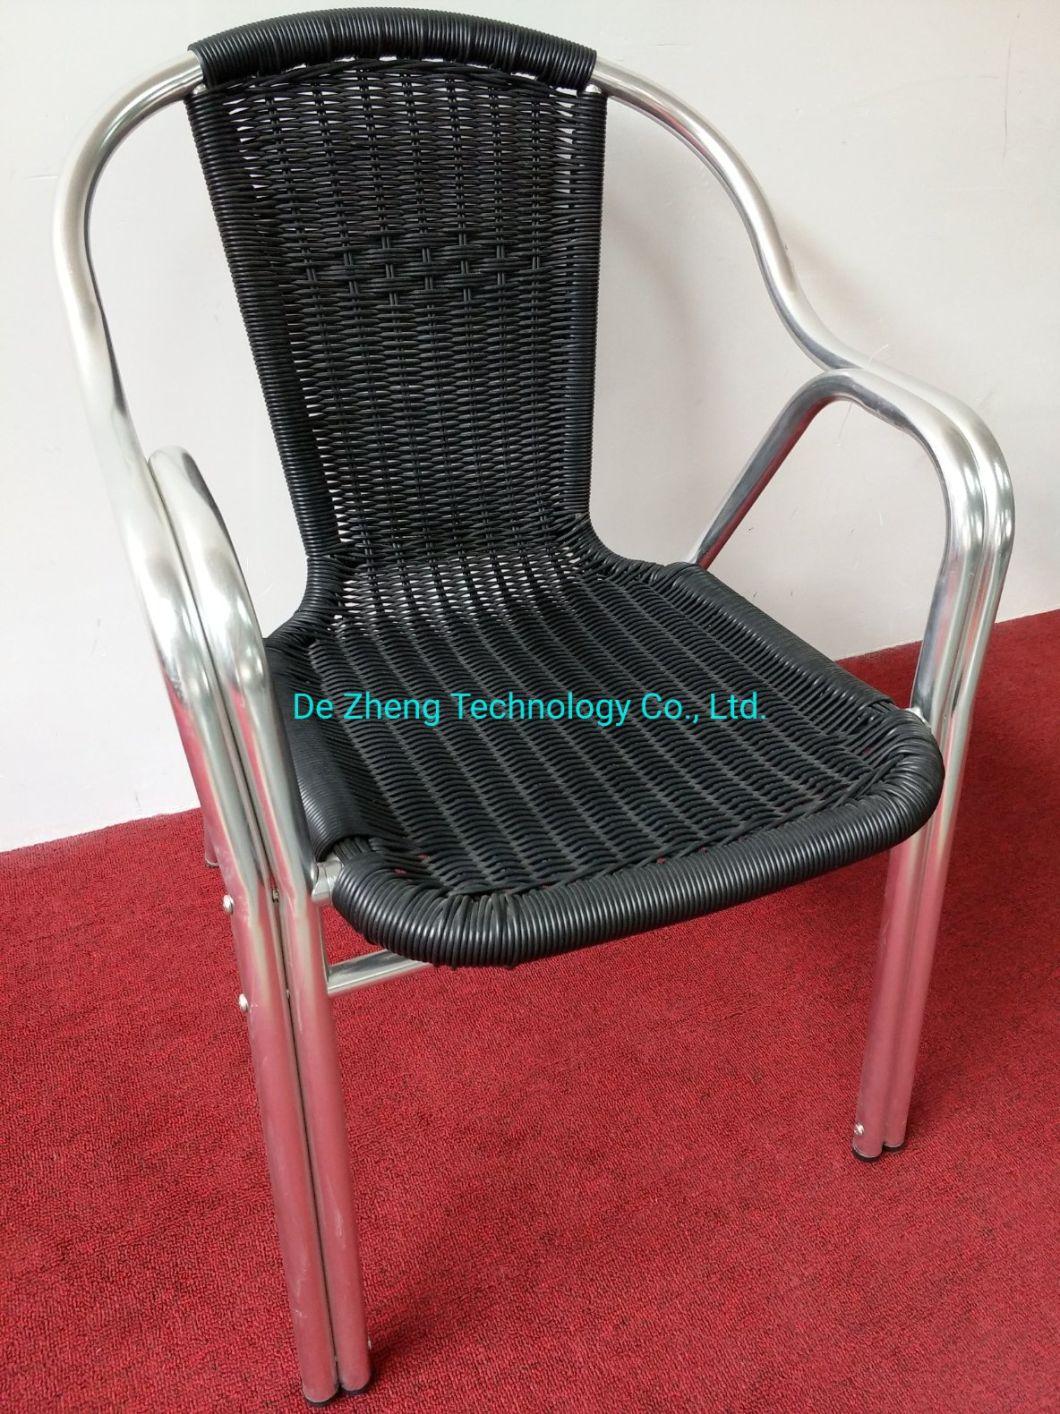 Morden and Strong Colorful Wicker Dining Chair Indoor and Outdoor Metal Rattan Furniture